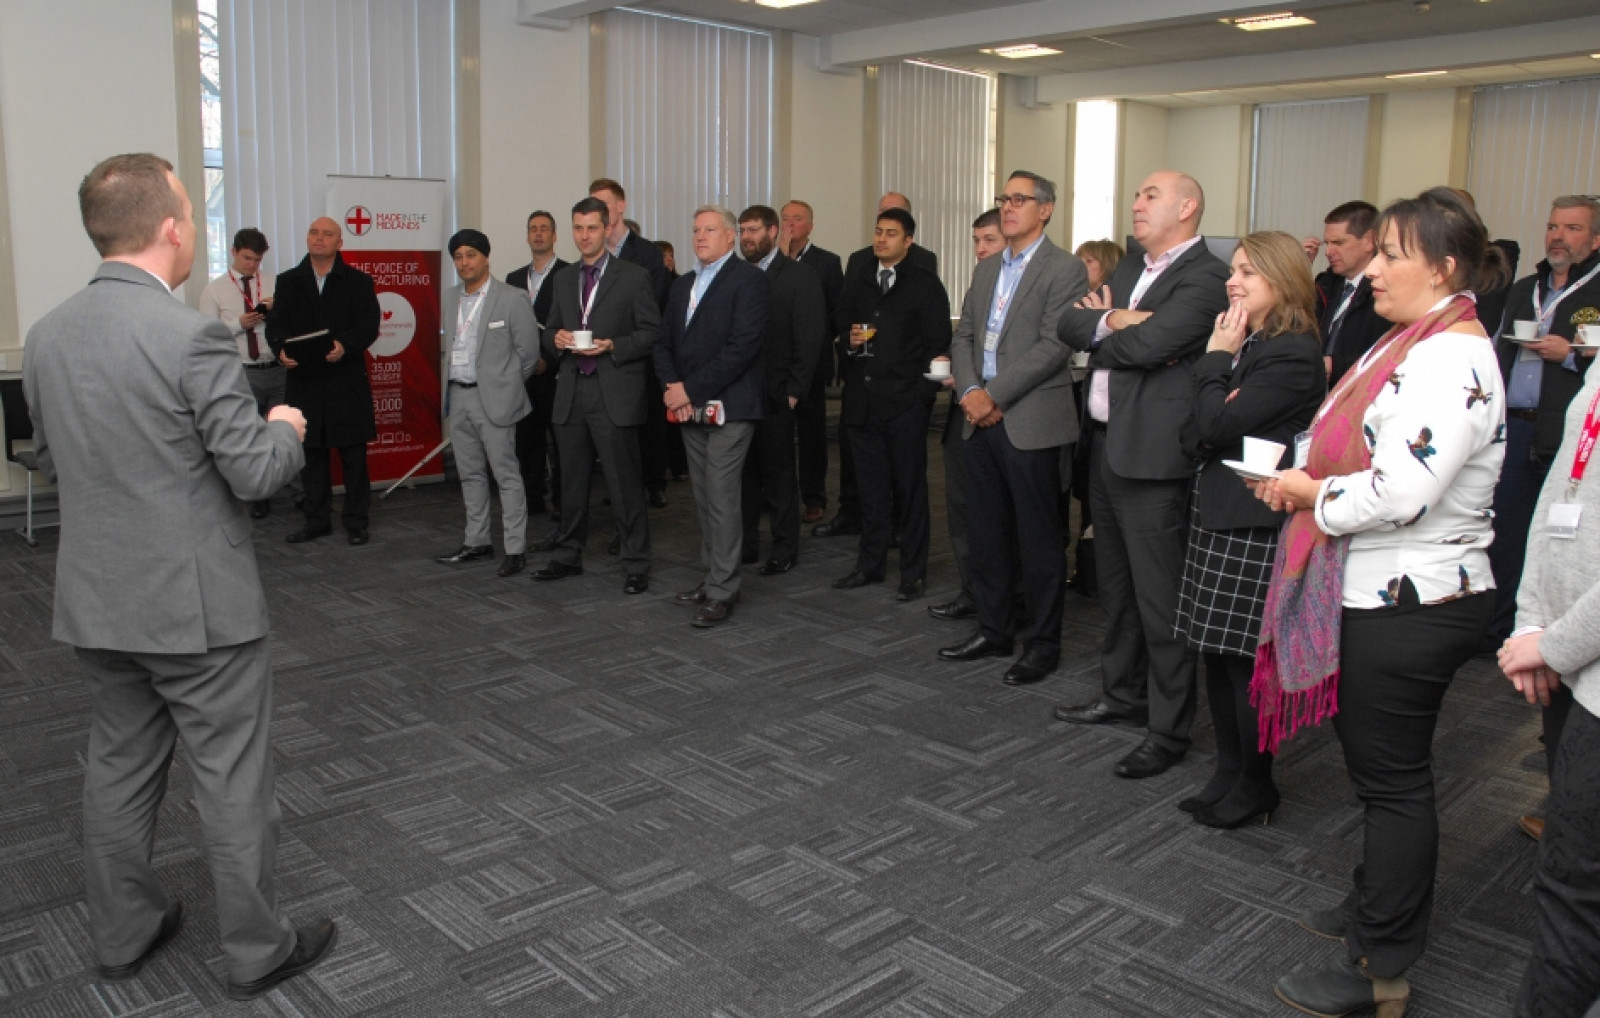 Members discover how Dudley College support the future of manufacturing